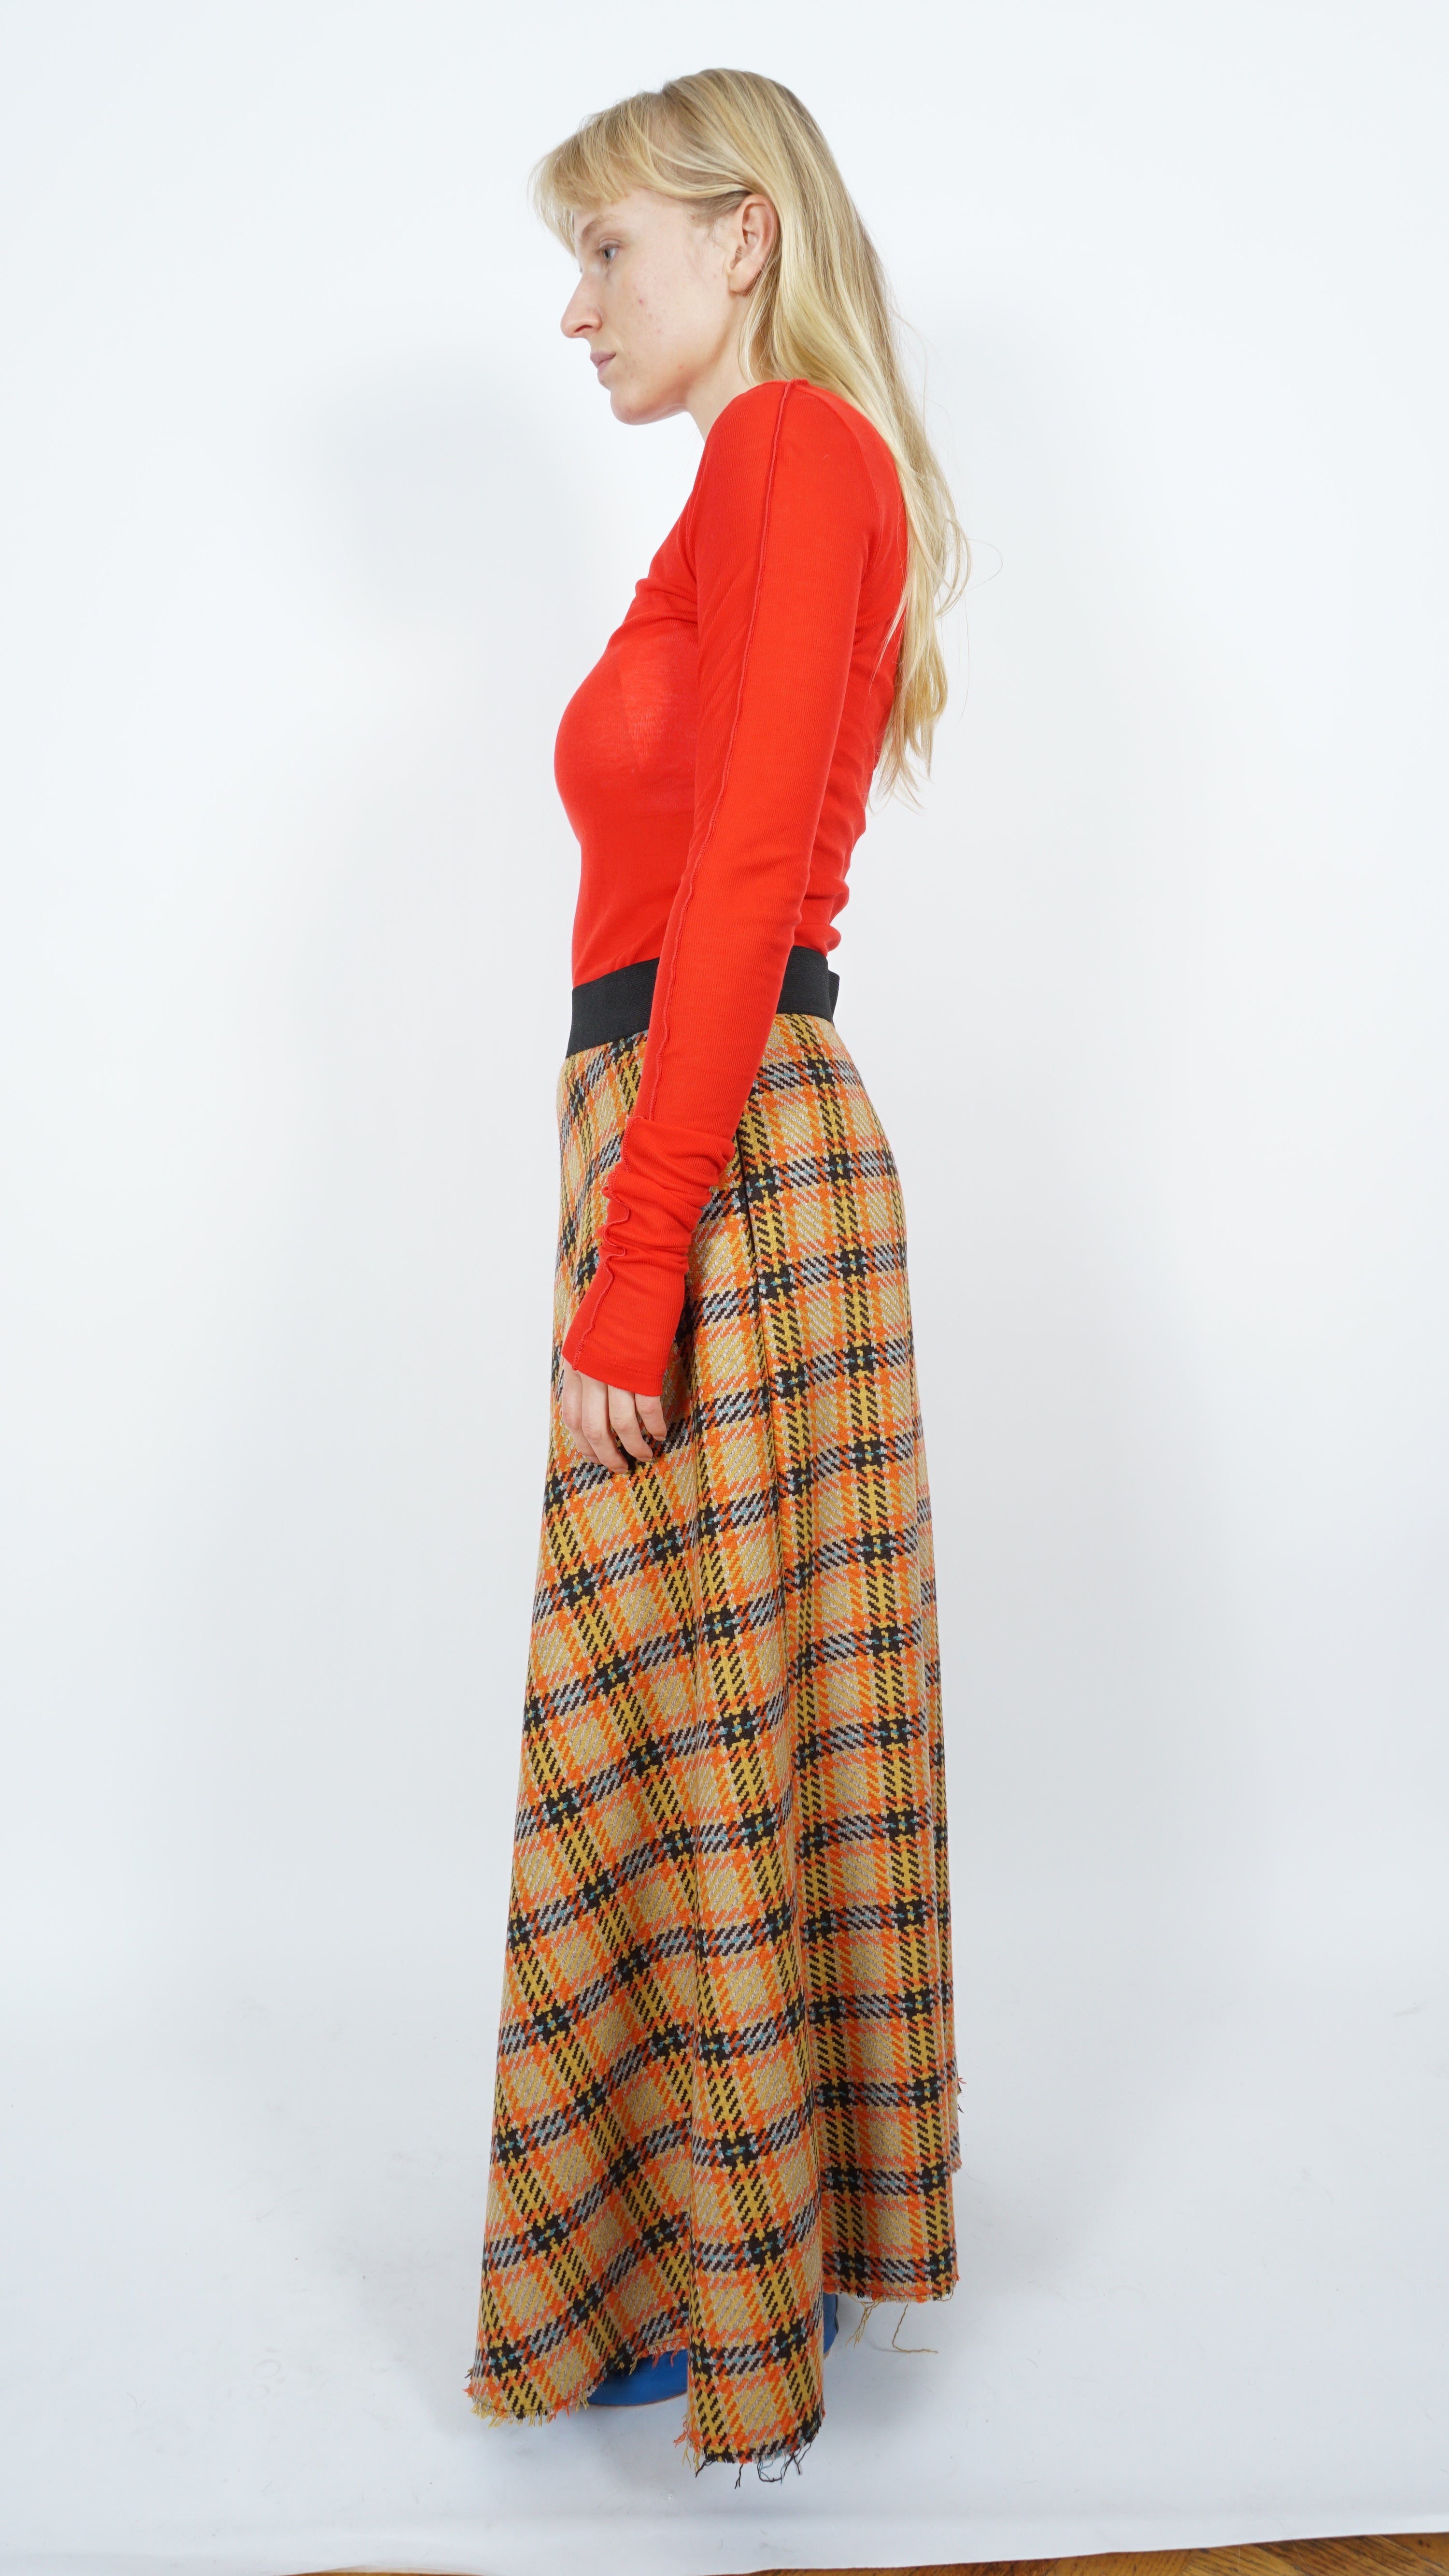 Checkered wool skirt by Sabine Poupinel